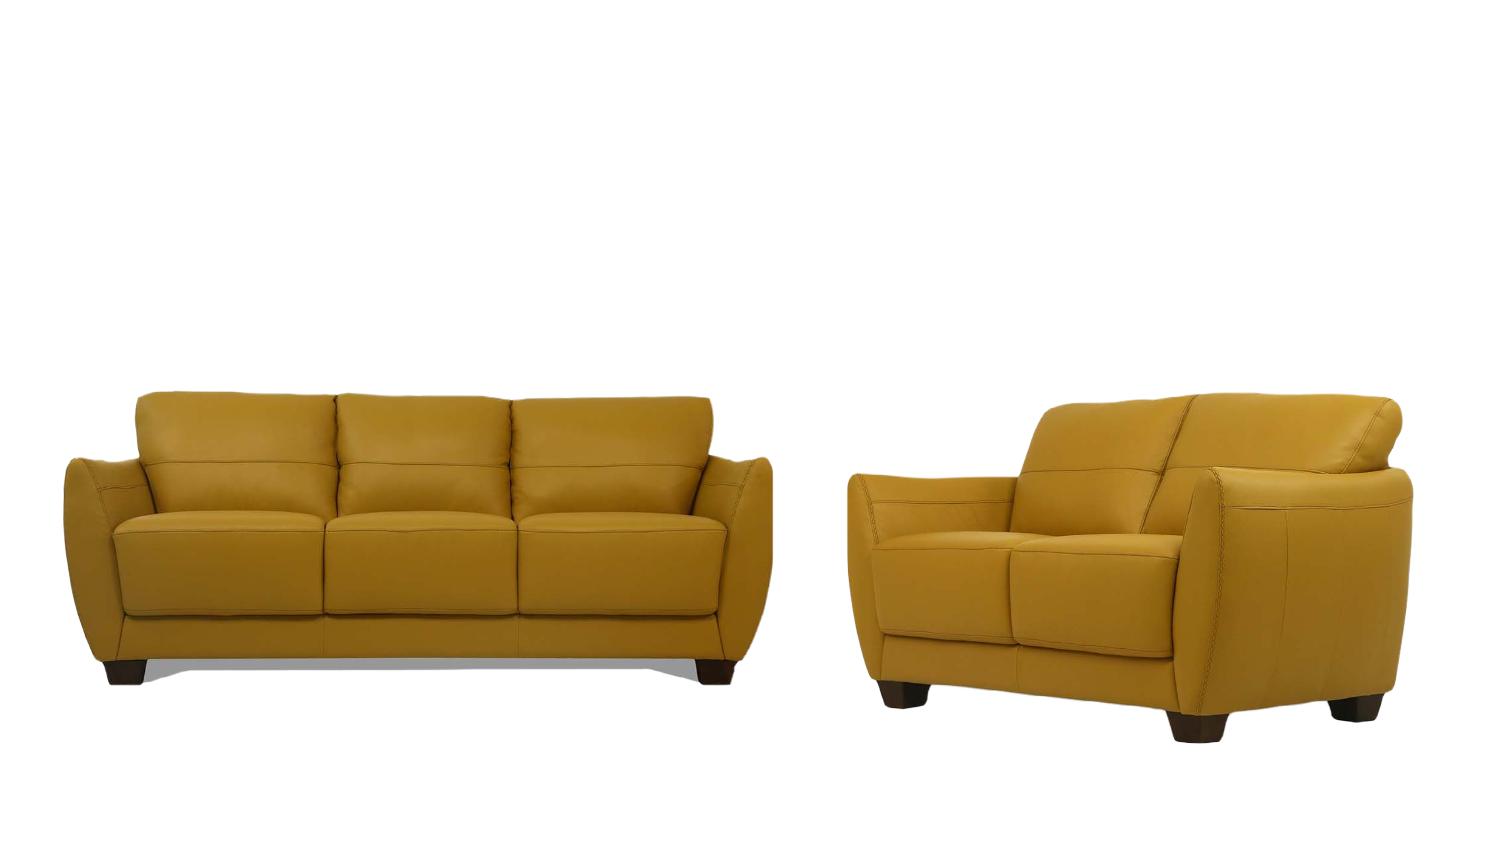 Modern, Transitional Sofa and Loveseat Set Valeria 54945-2pcs in Yellow Leather